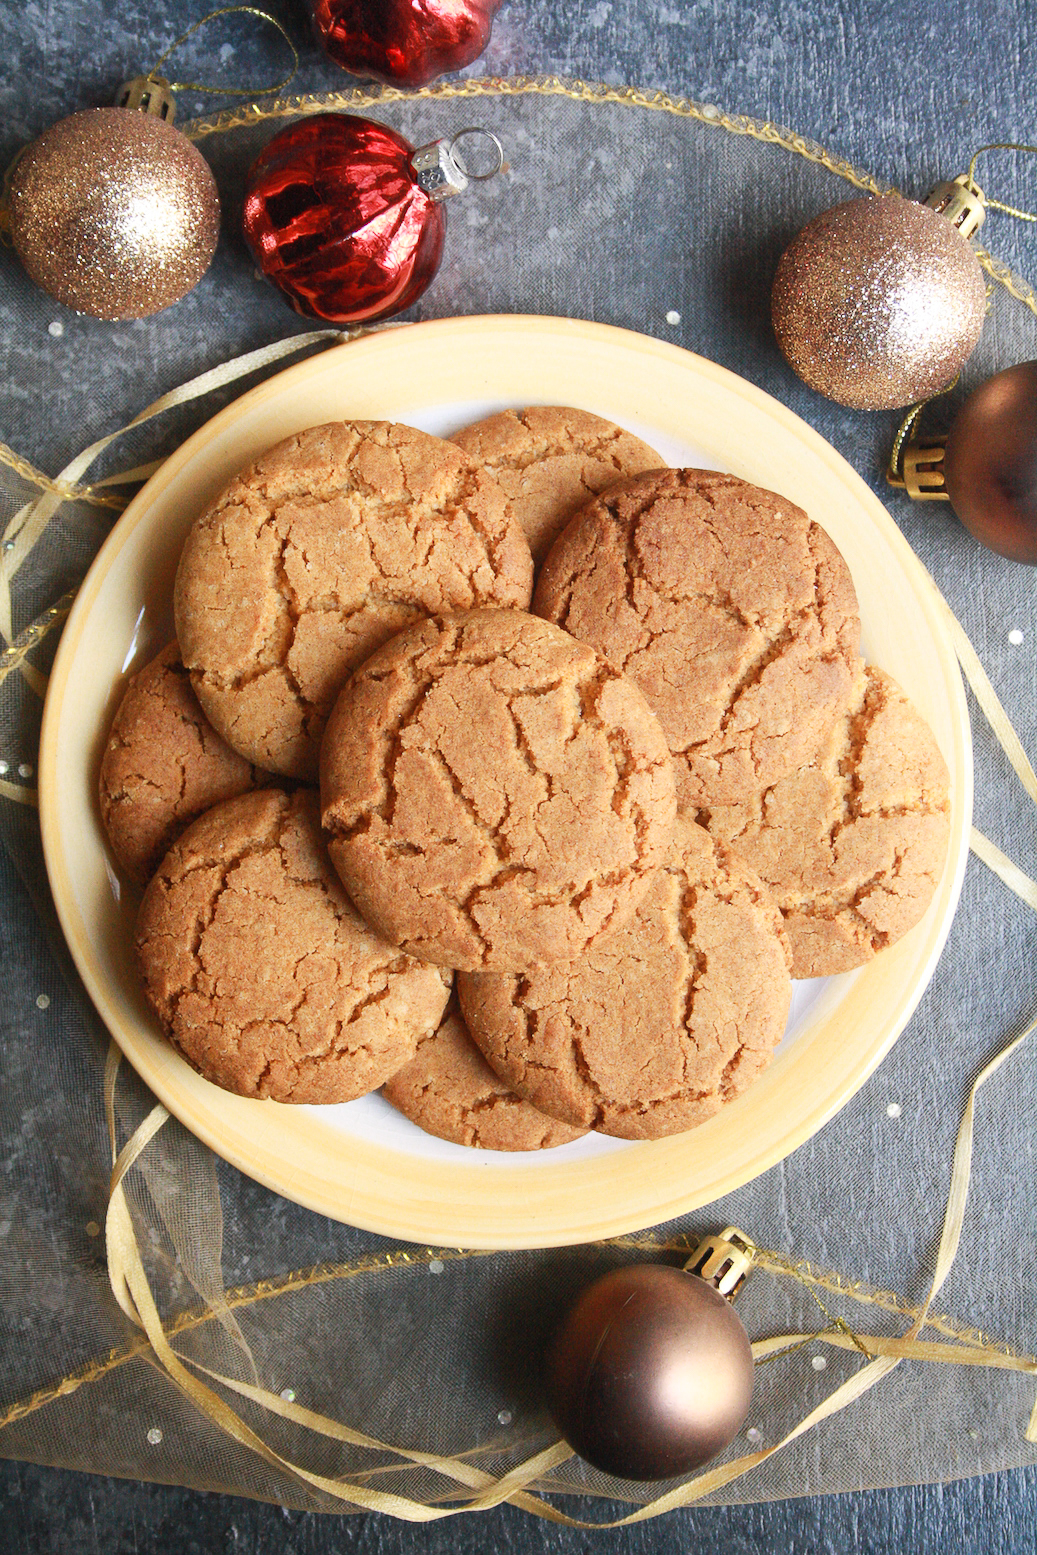 Perfectly sweet and spicy ginger biscuits waiting to be dunked into a mug of hot tea!